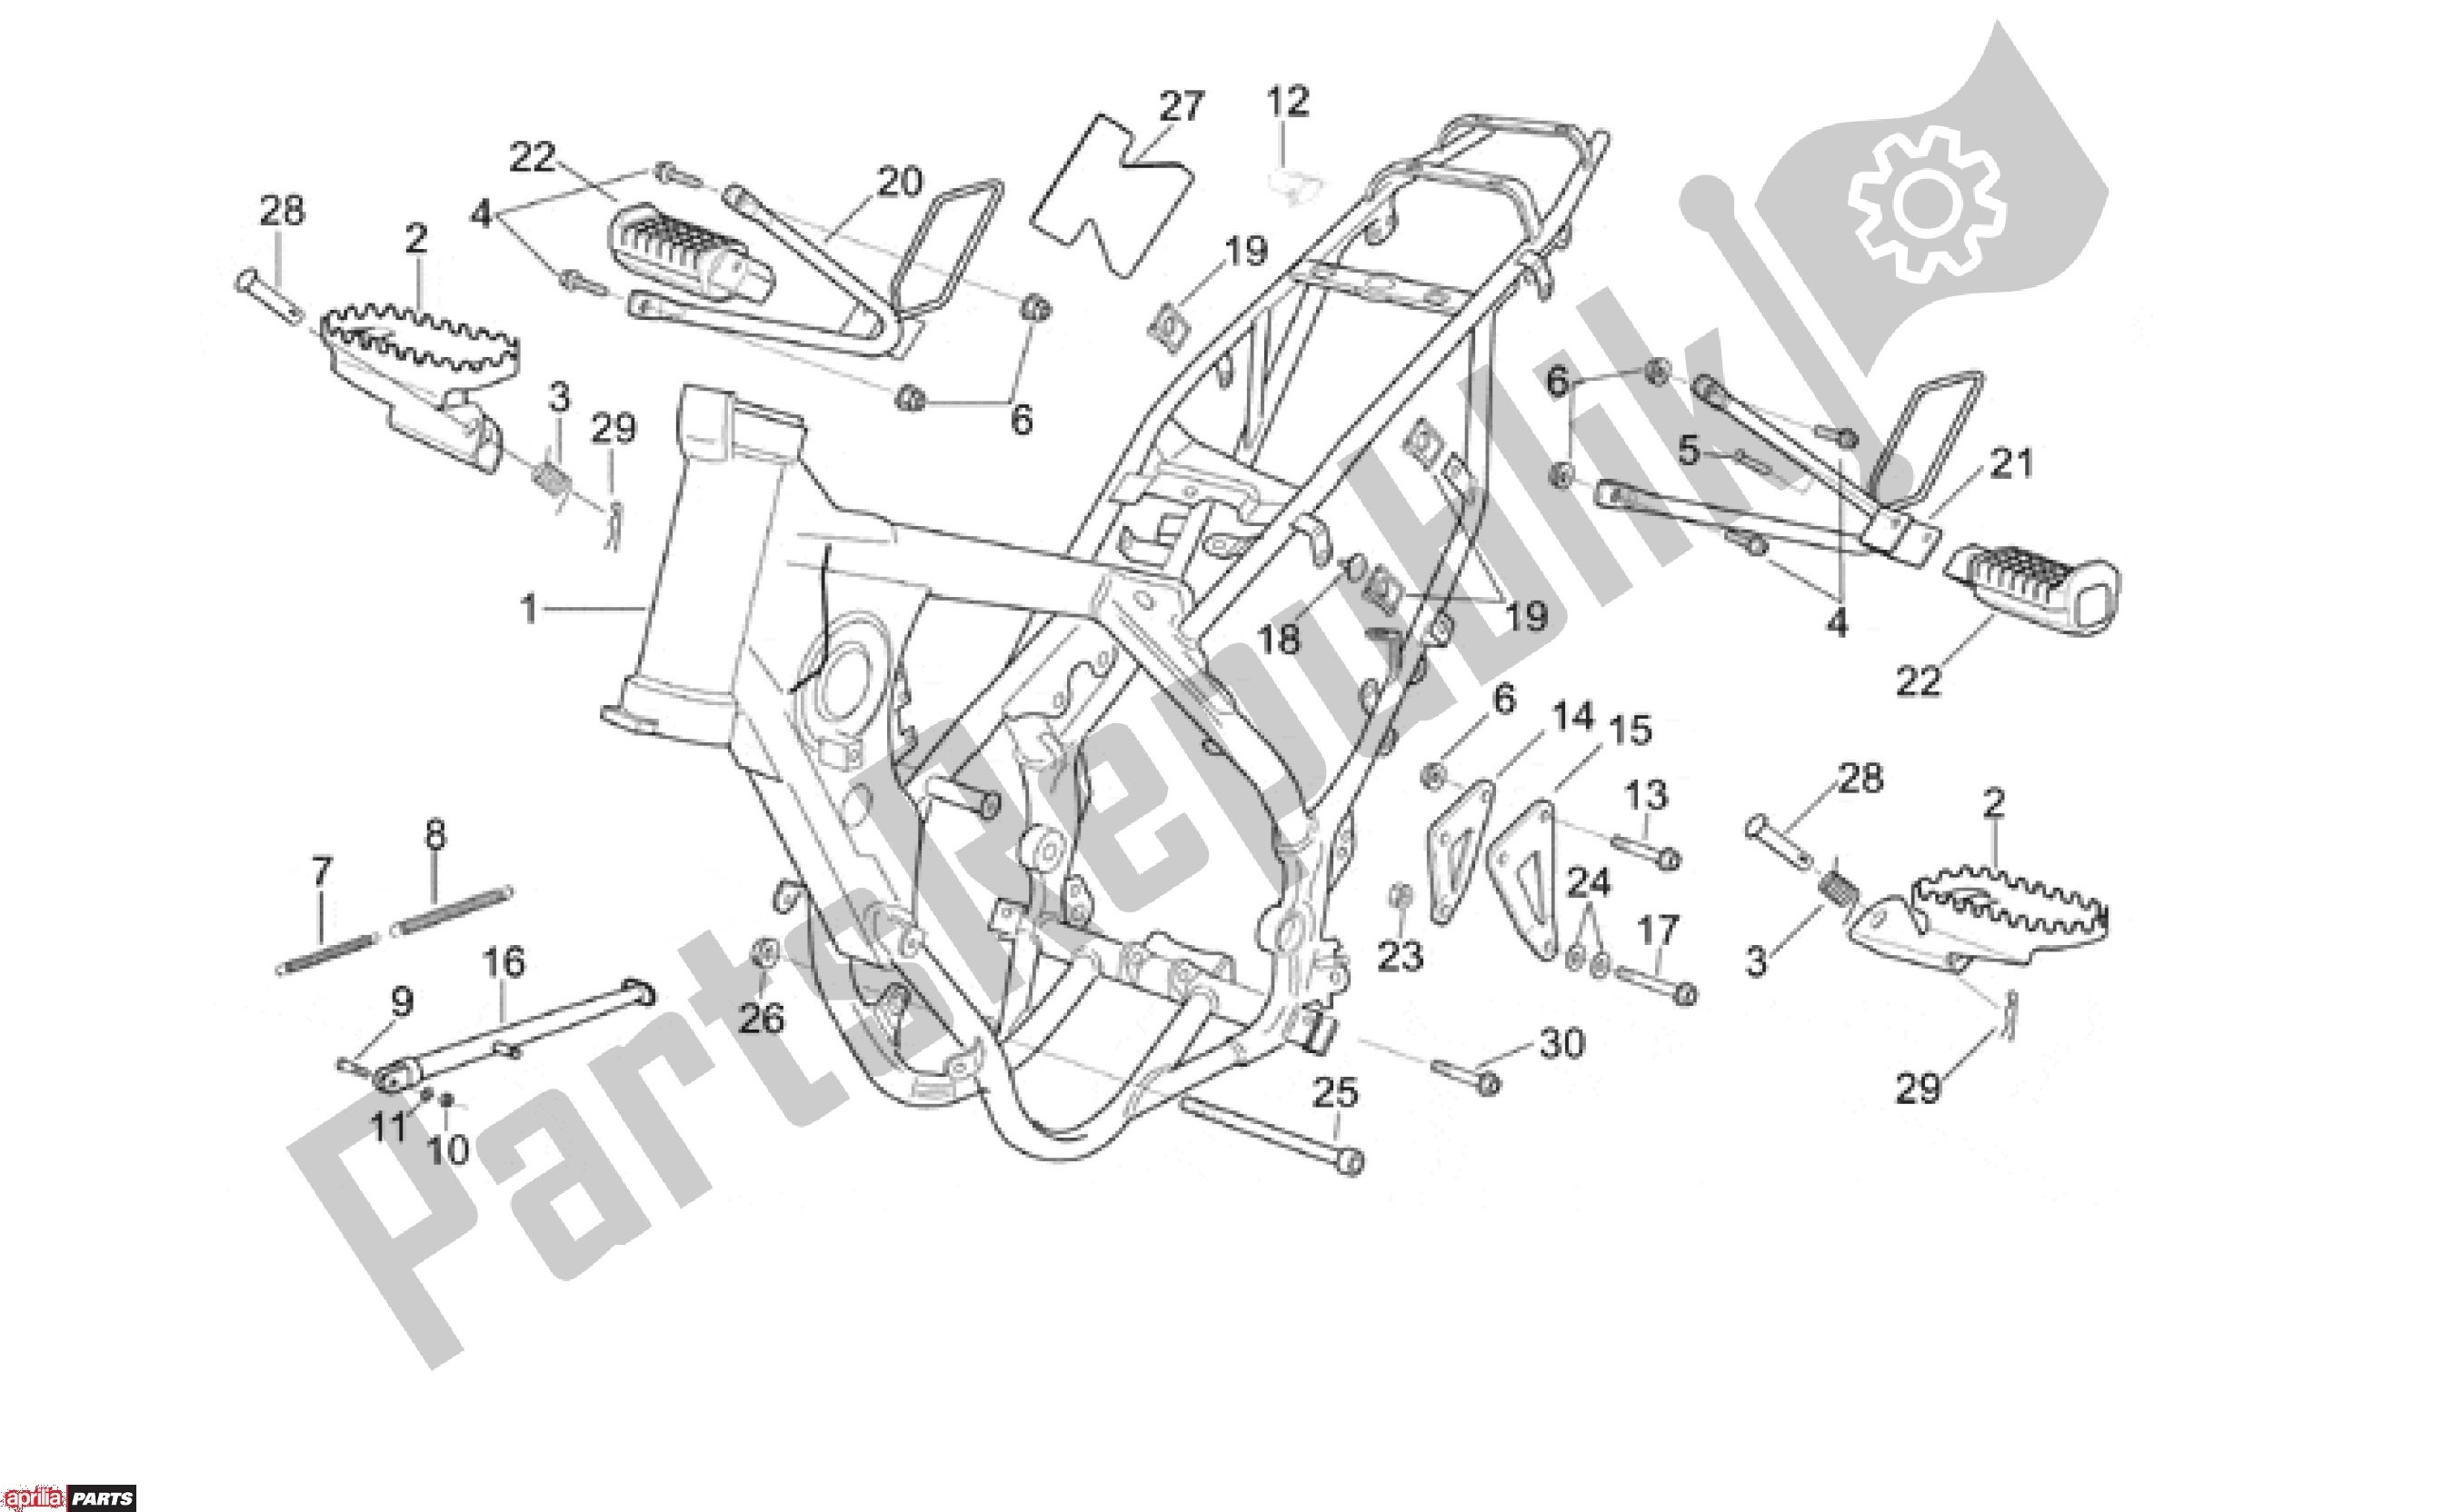 All parts for the Frame of the Aprilia ETX / RX 108 125 1999 - 2001